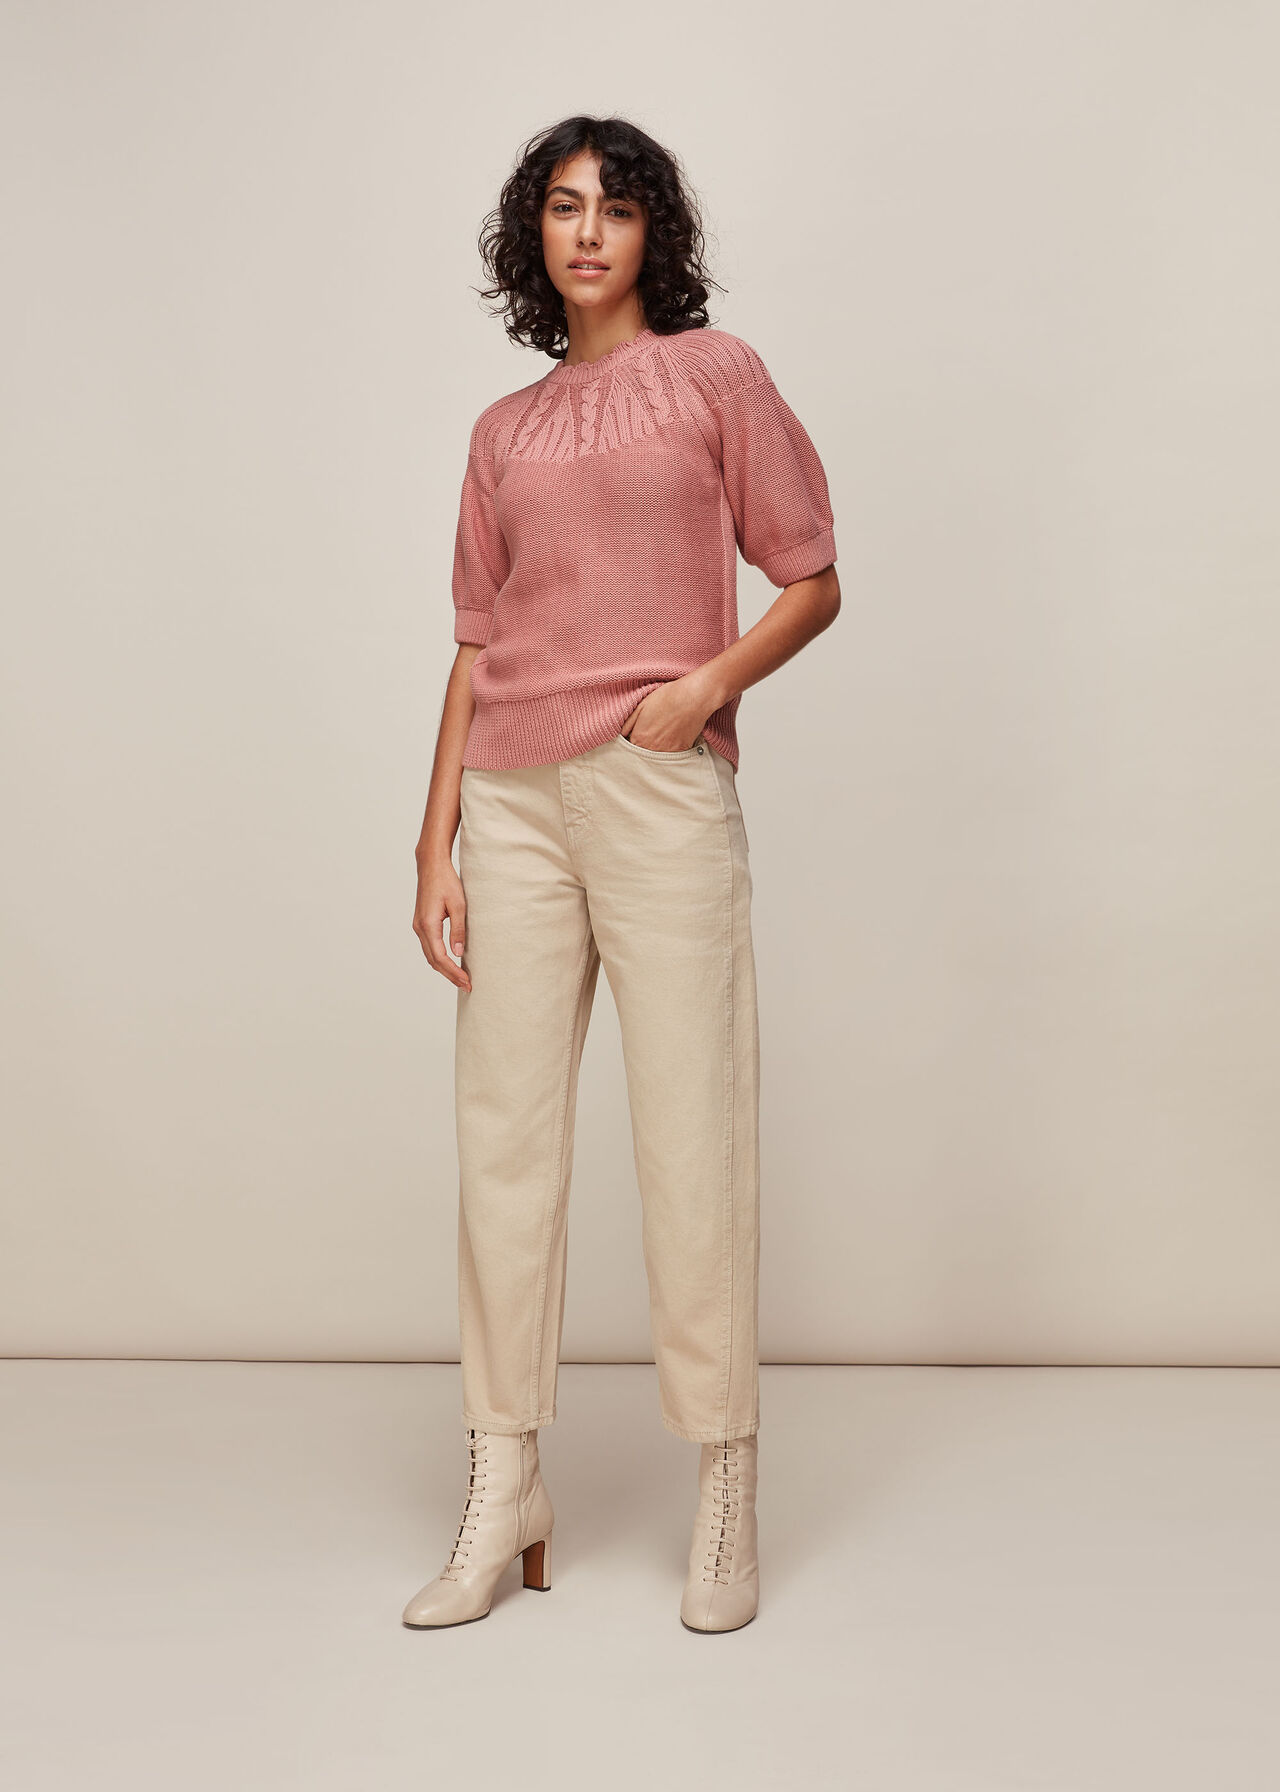 Bell Sleeve Cable Knit Pale Pink